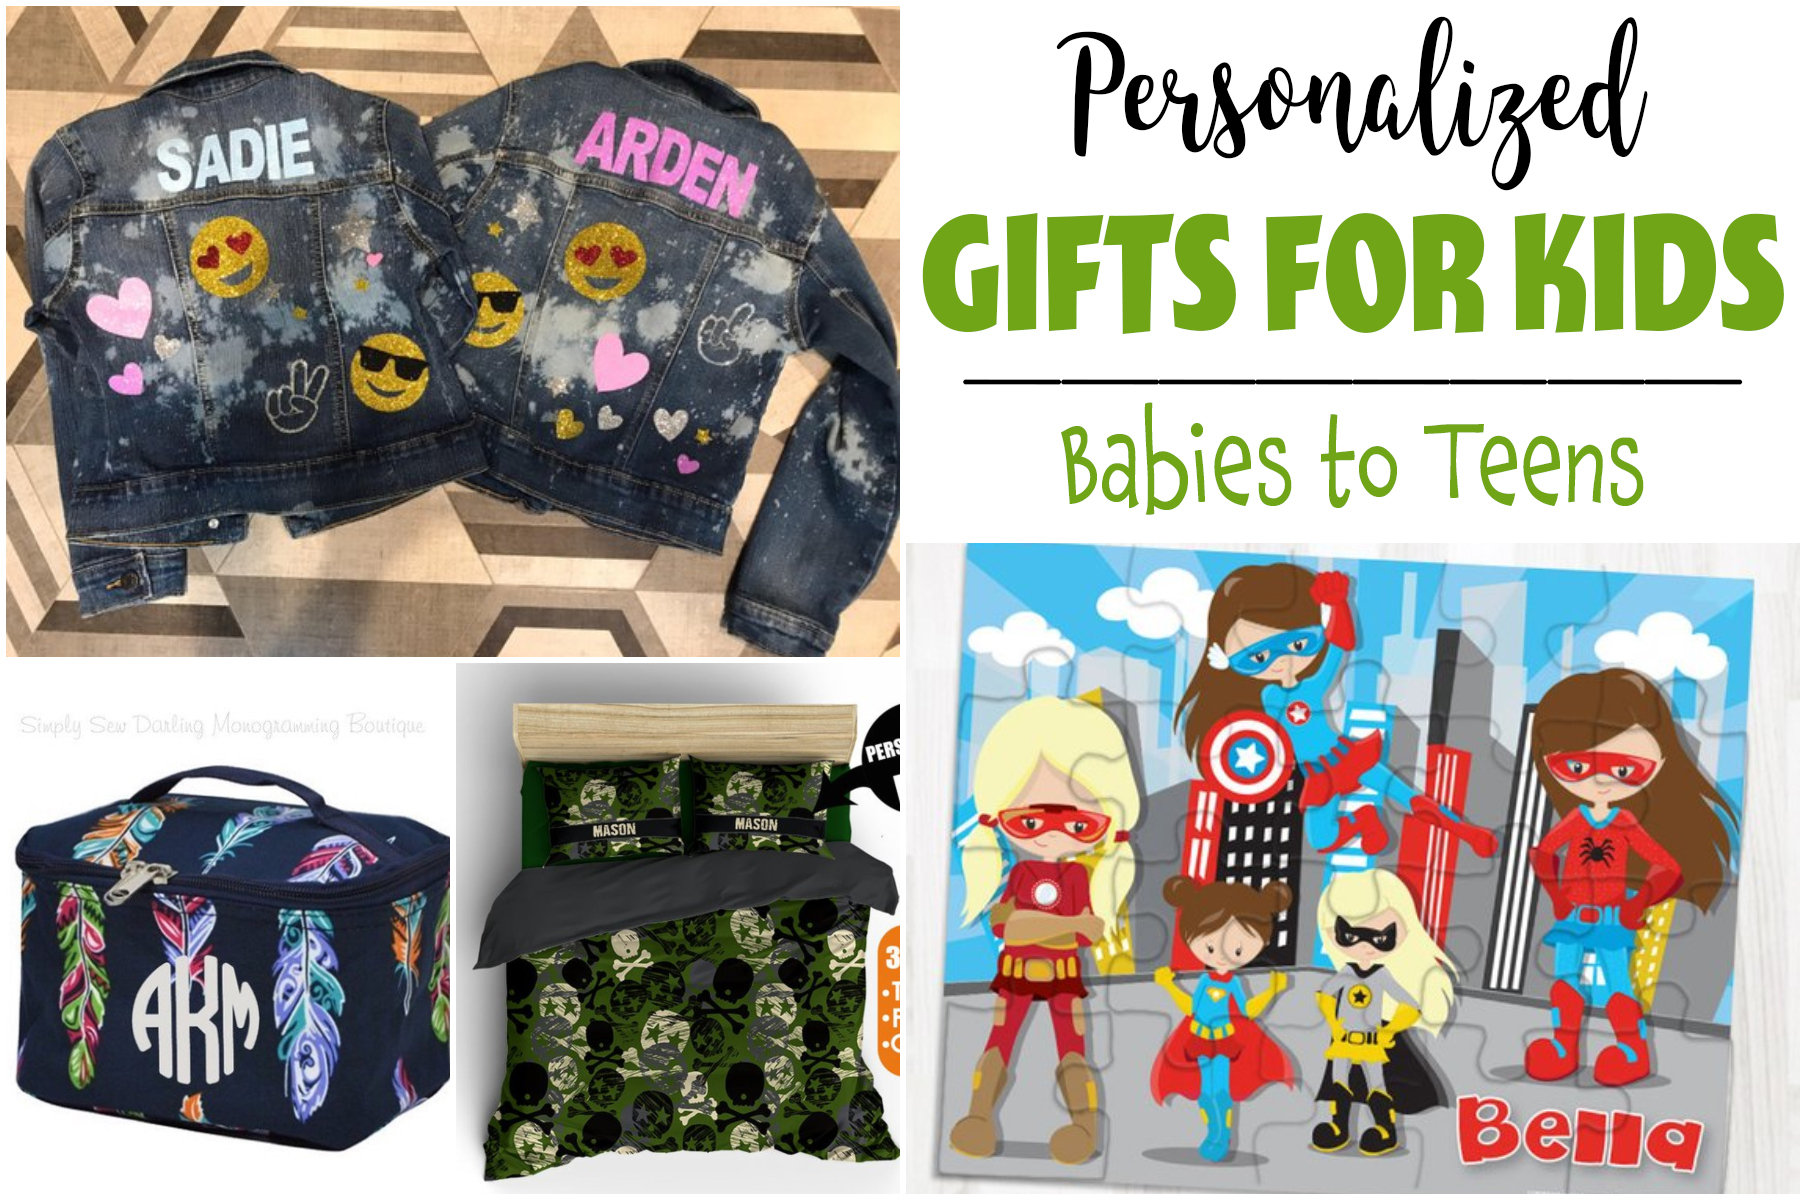 keepsake gifts for toddlers